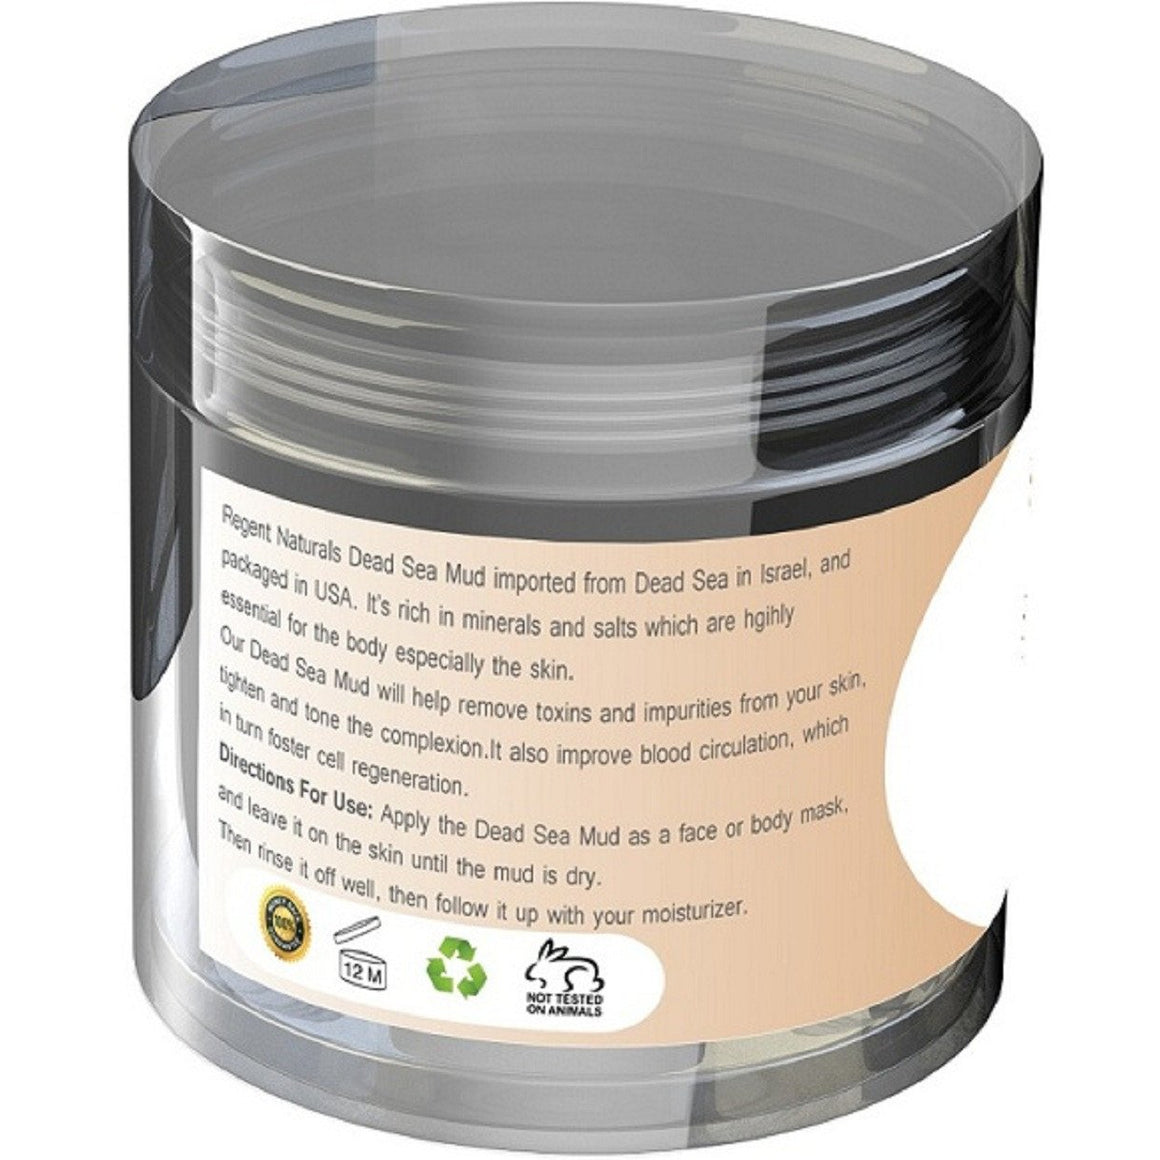 Premium Dead Sea Mud 6oz. Rich in Minerals from Dead Sea Israel. Get ONE Now!